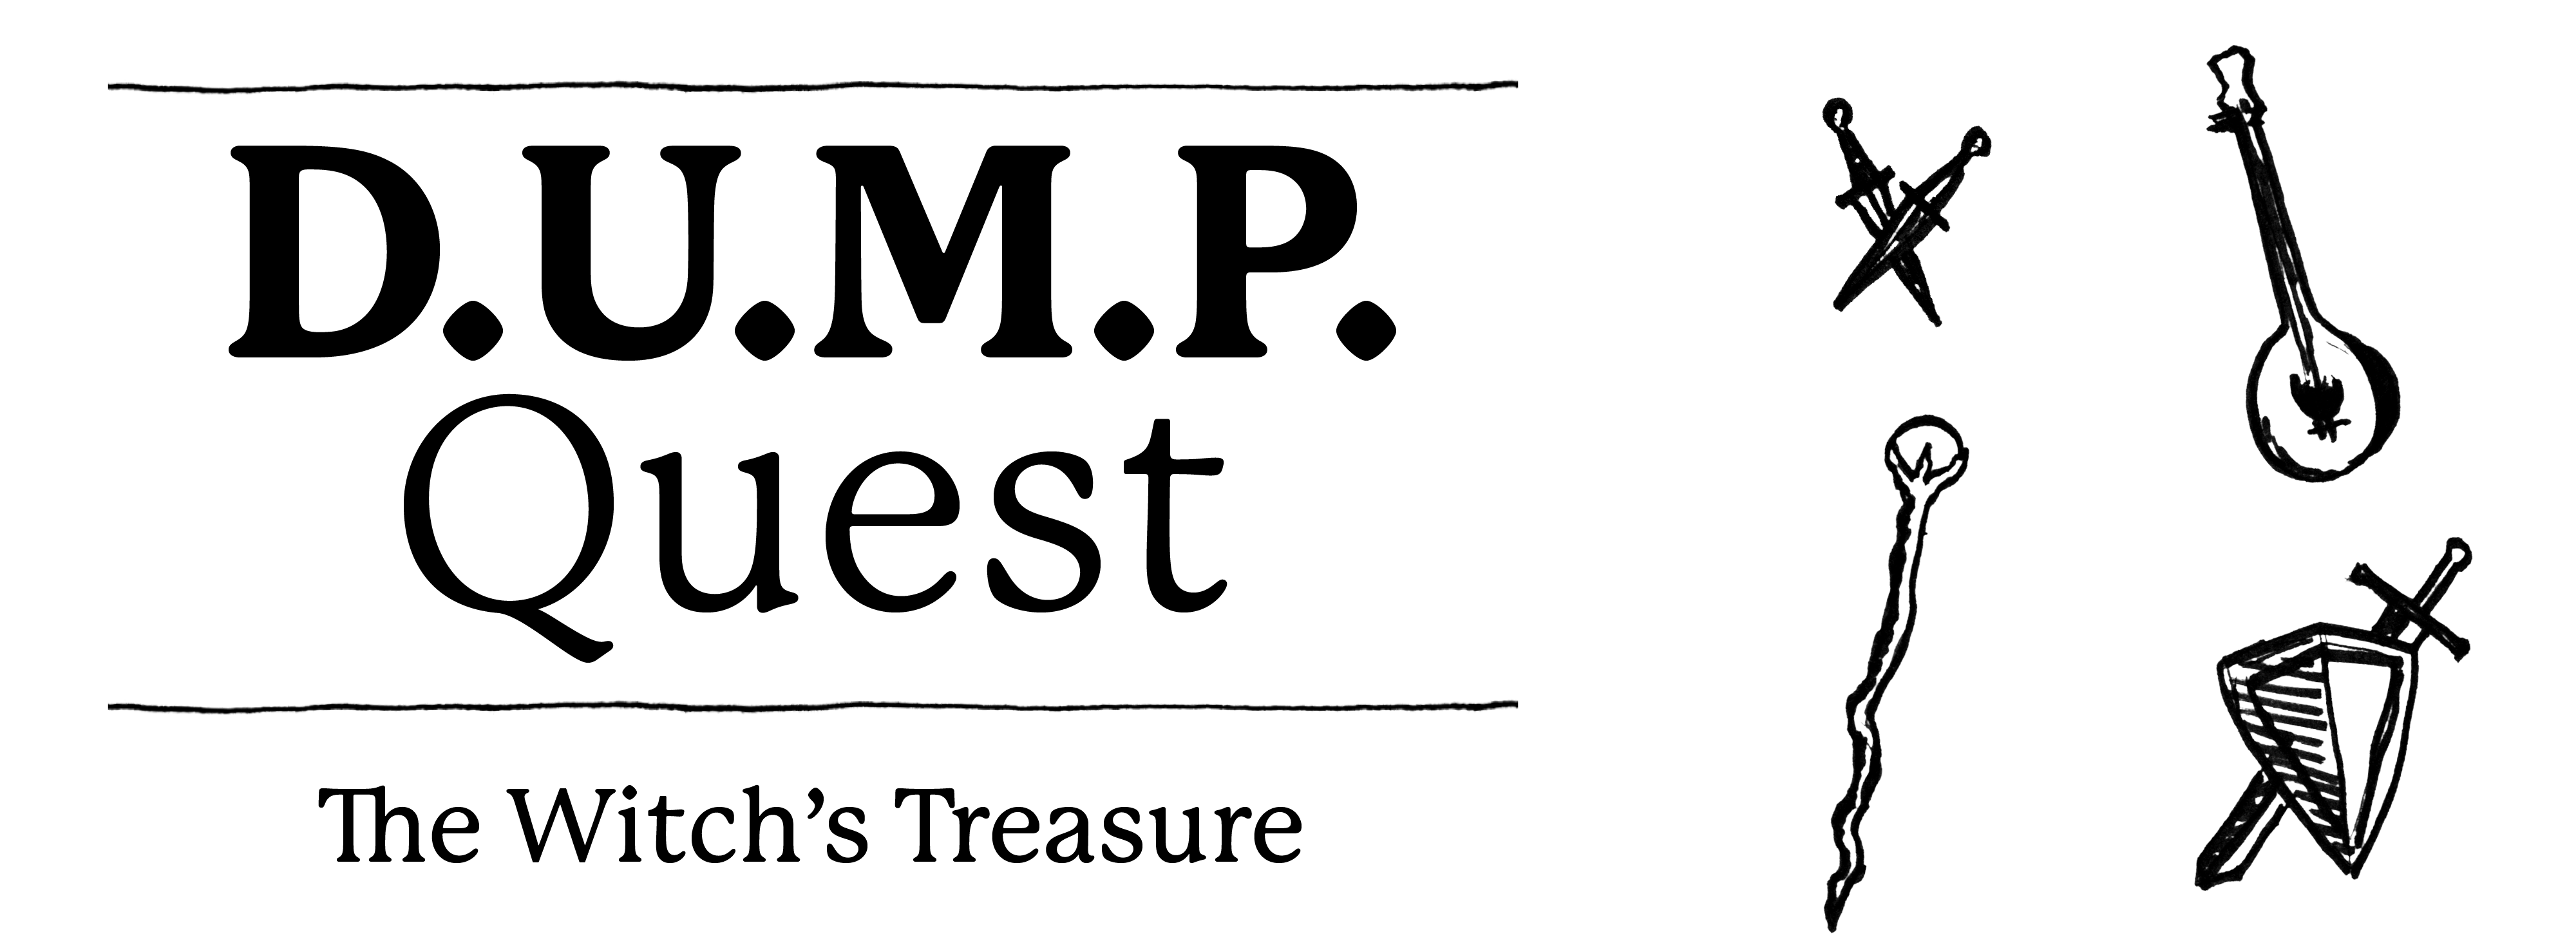 DUMP Quest - The Witch's Treasure